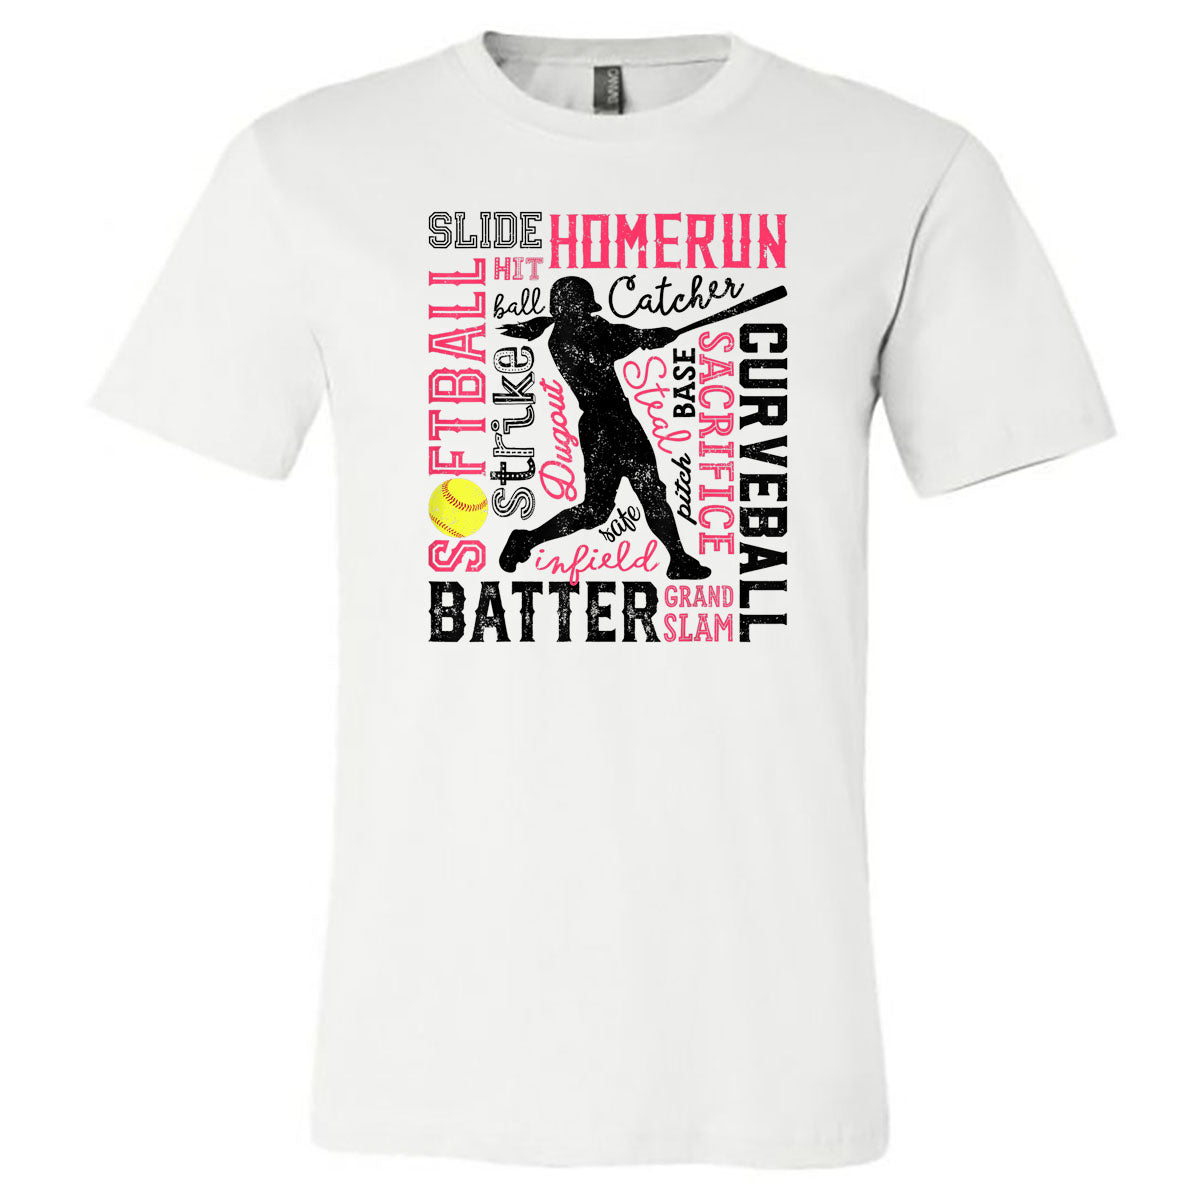 Softball Words - White Tee - Southern Grace Creations